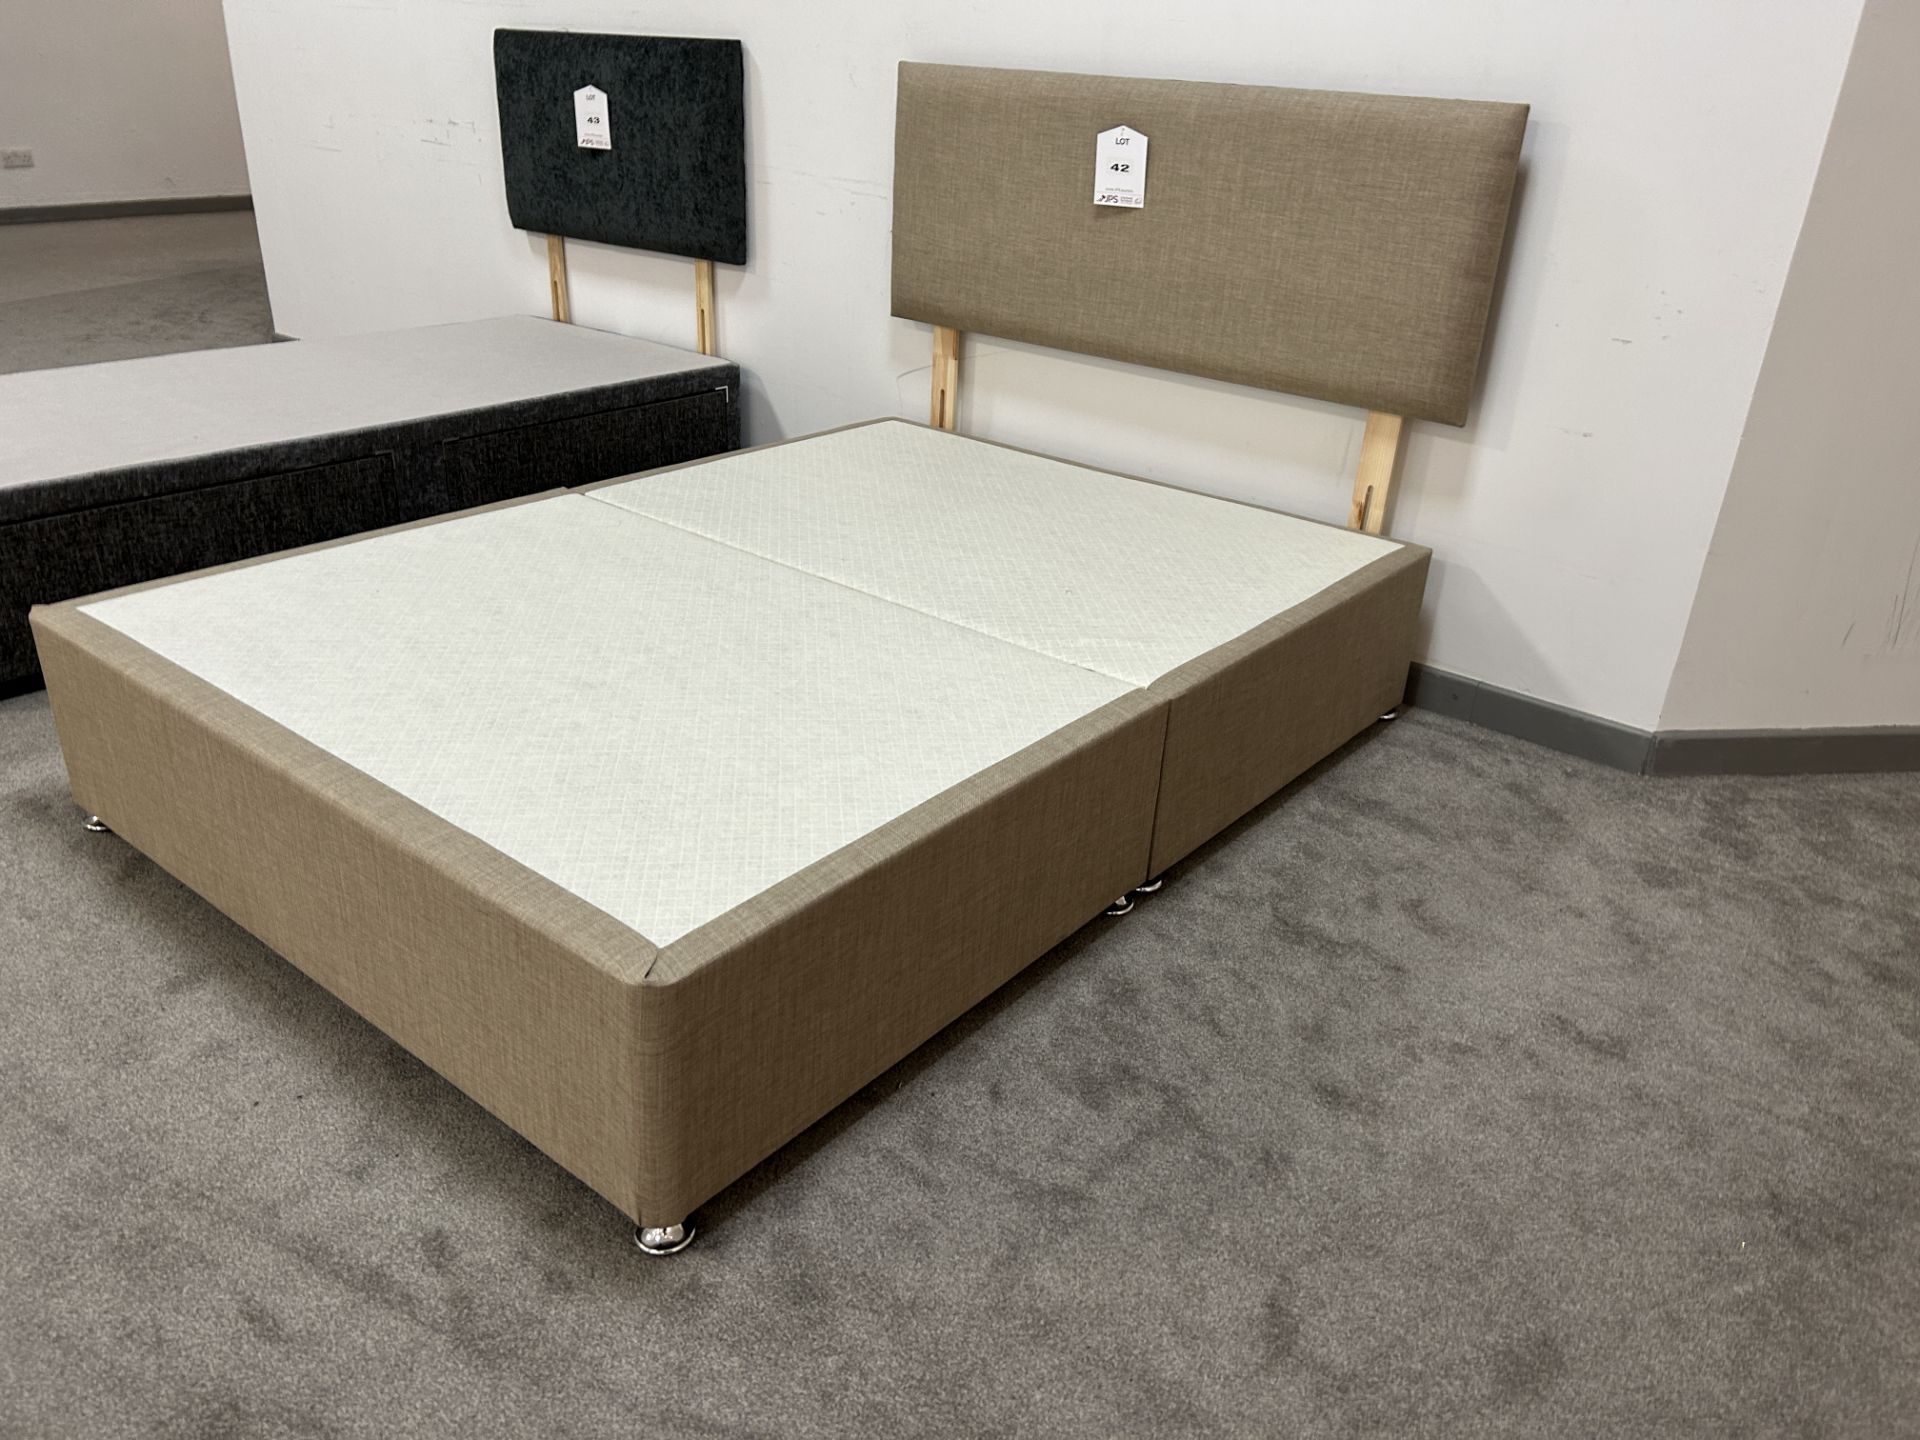 Ex-Display Double Size Bed Set incl: Base & Headboard in Beige - Image 3 of 3